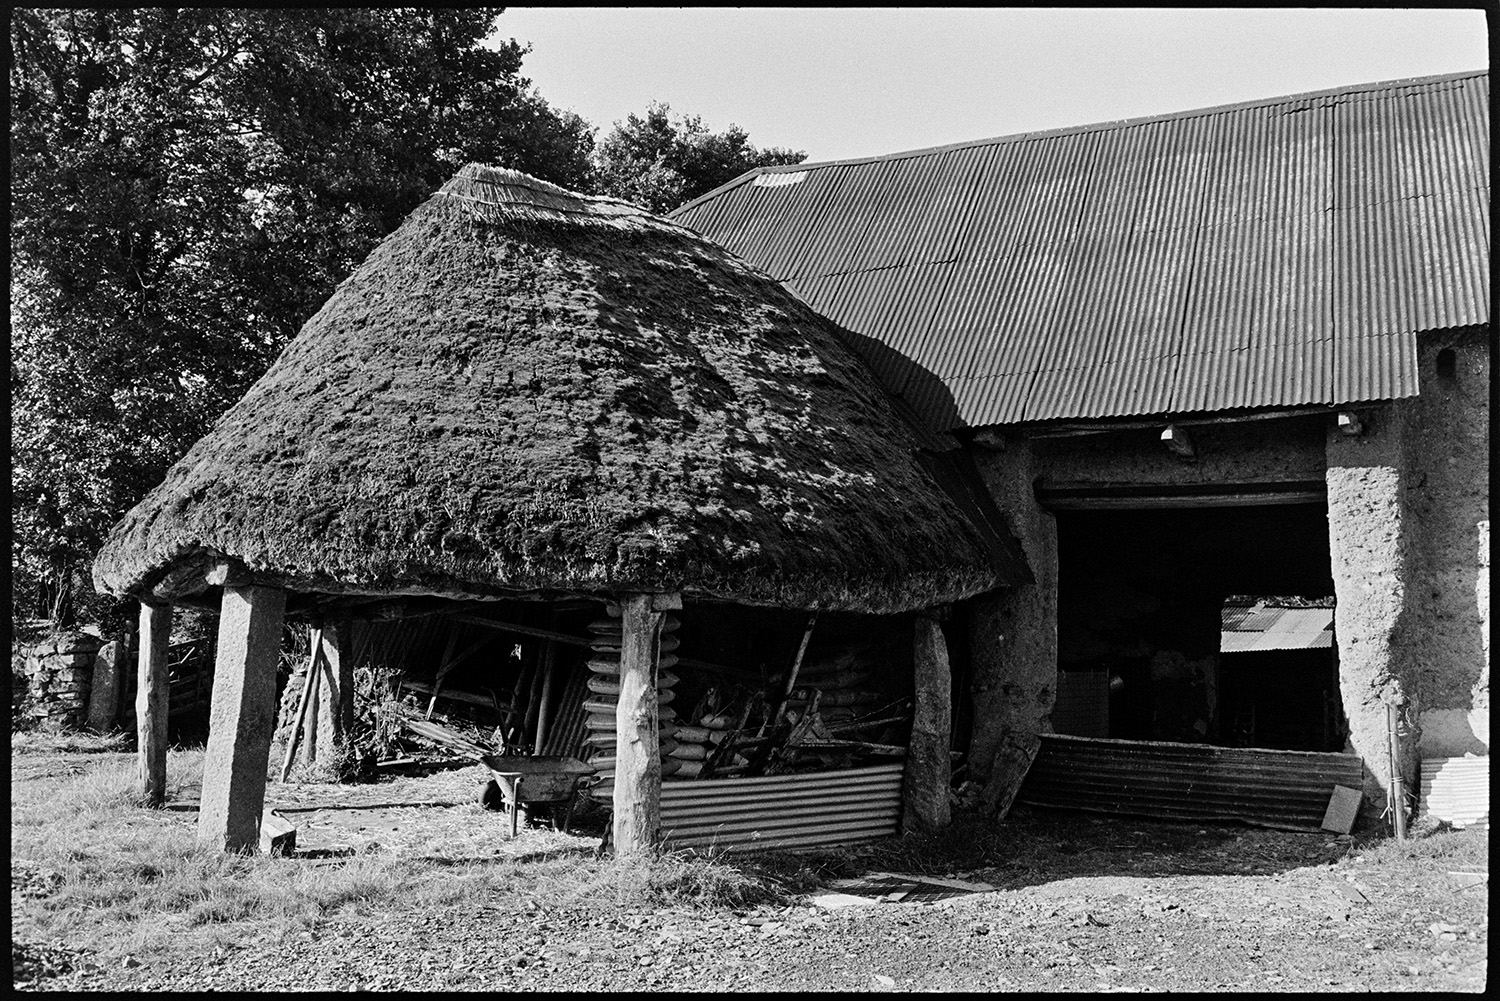 Barn and thatched roundhouse with pillars. 
[A cob barn with a corrugated iron roof and thatched roundhouse with wooden and stone pillars at Chapple, Winkleigh. A wheelbarrow and sacks can be seen under the roundhouse.]